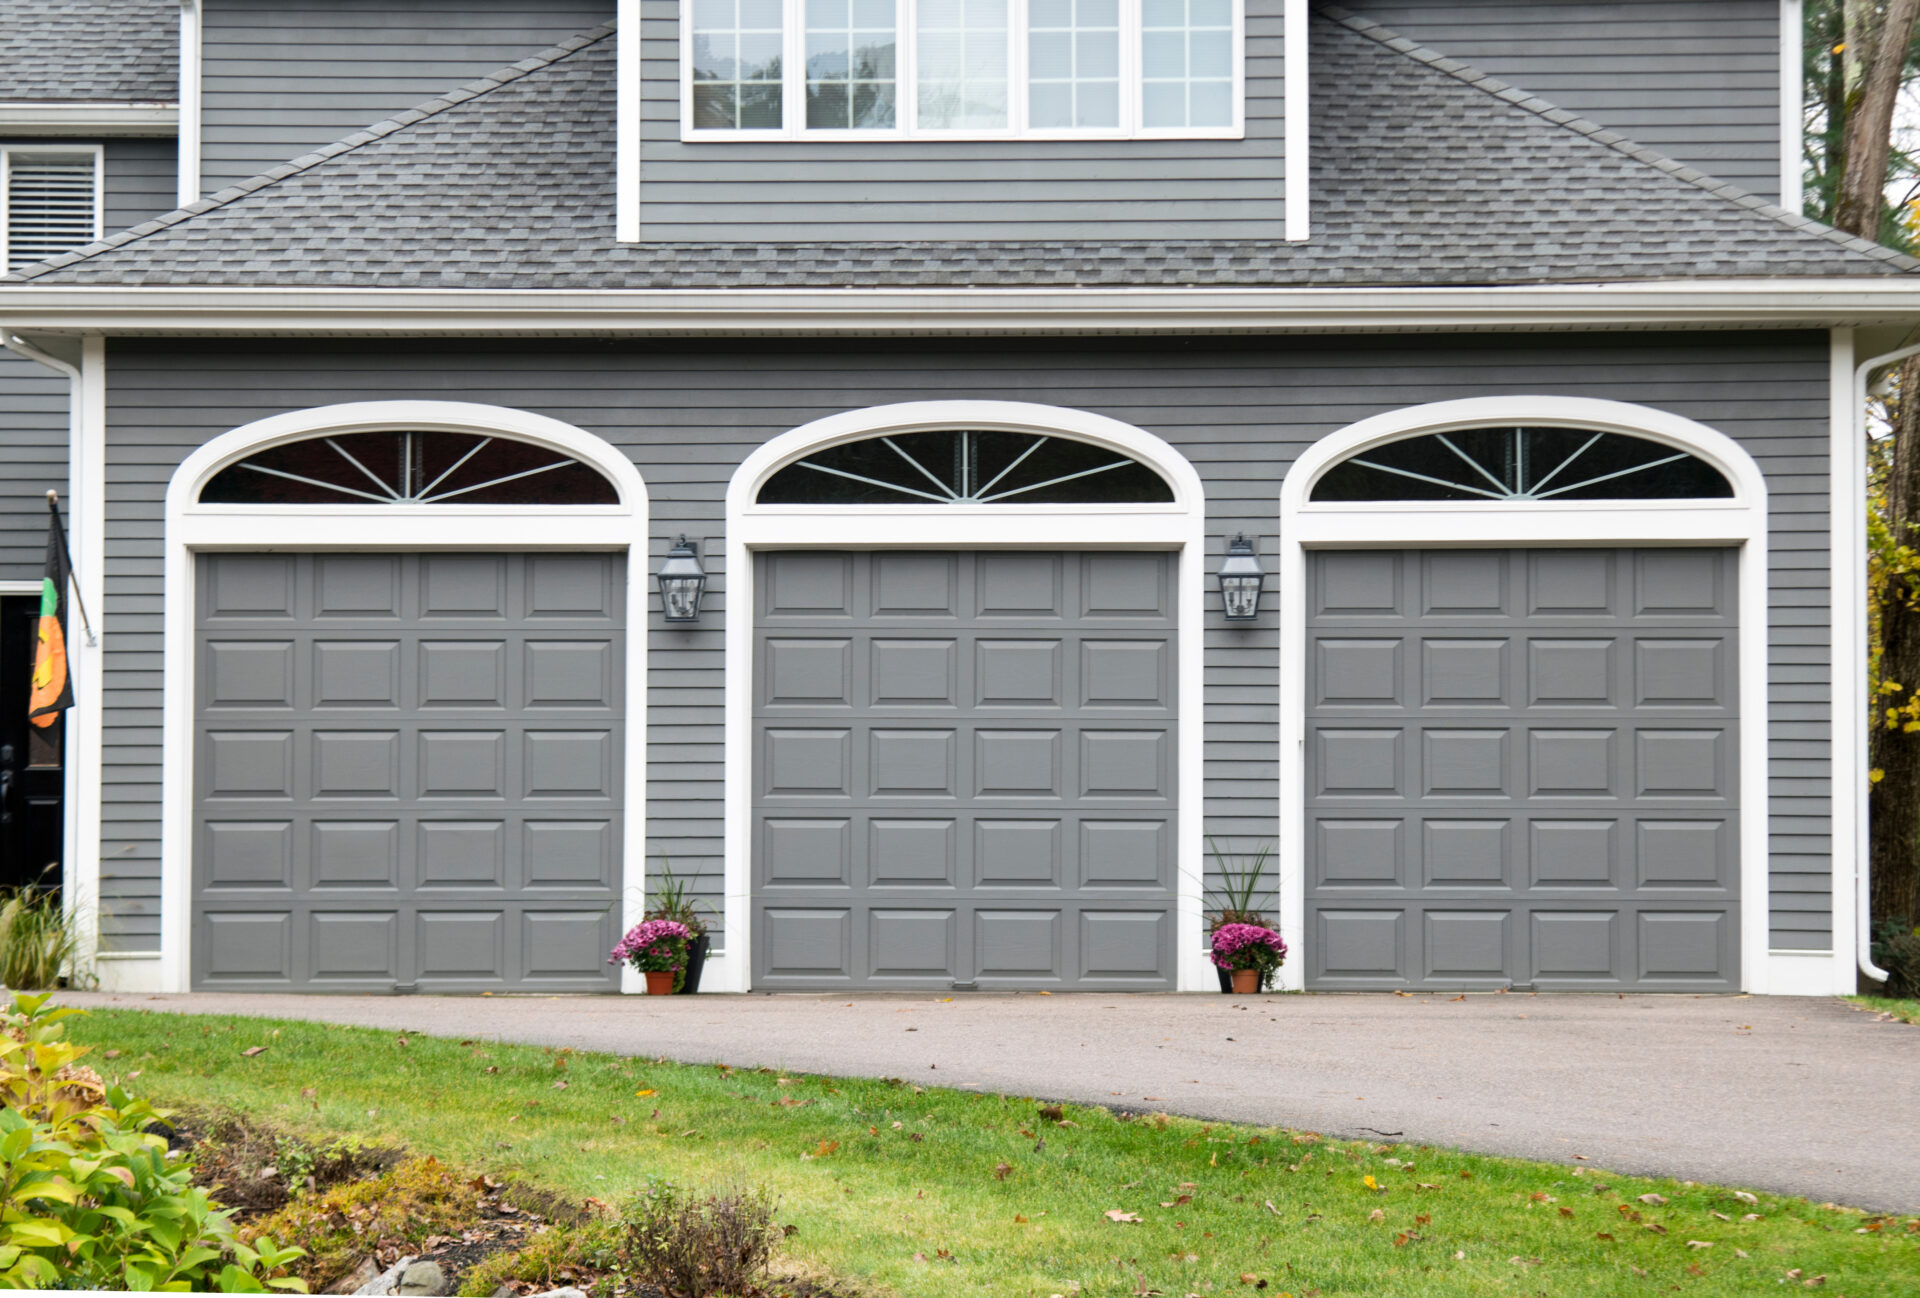 GARAGE DOOR at a typical single house painted in grey color